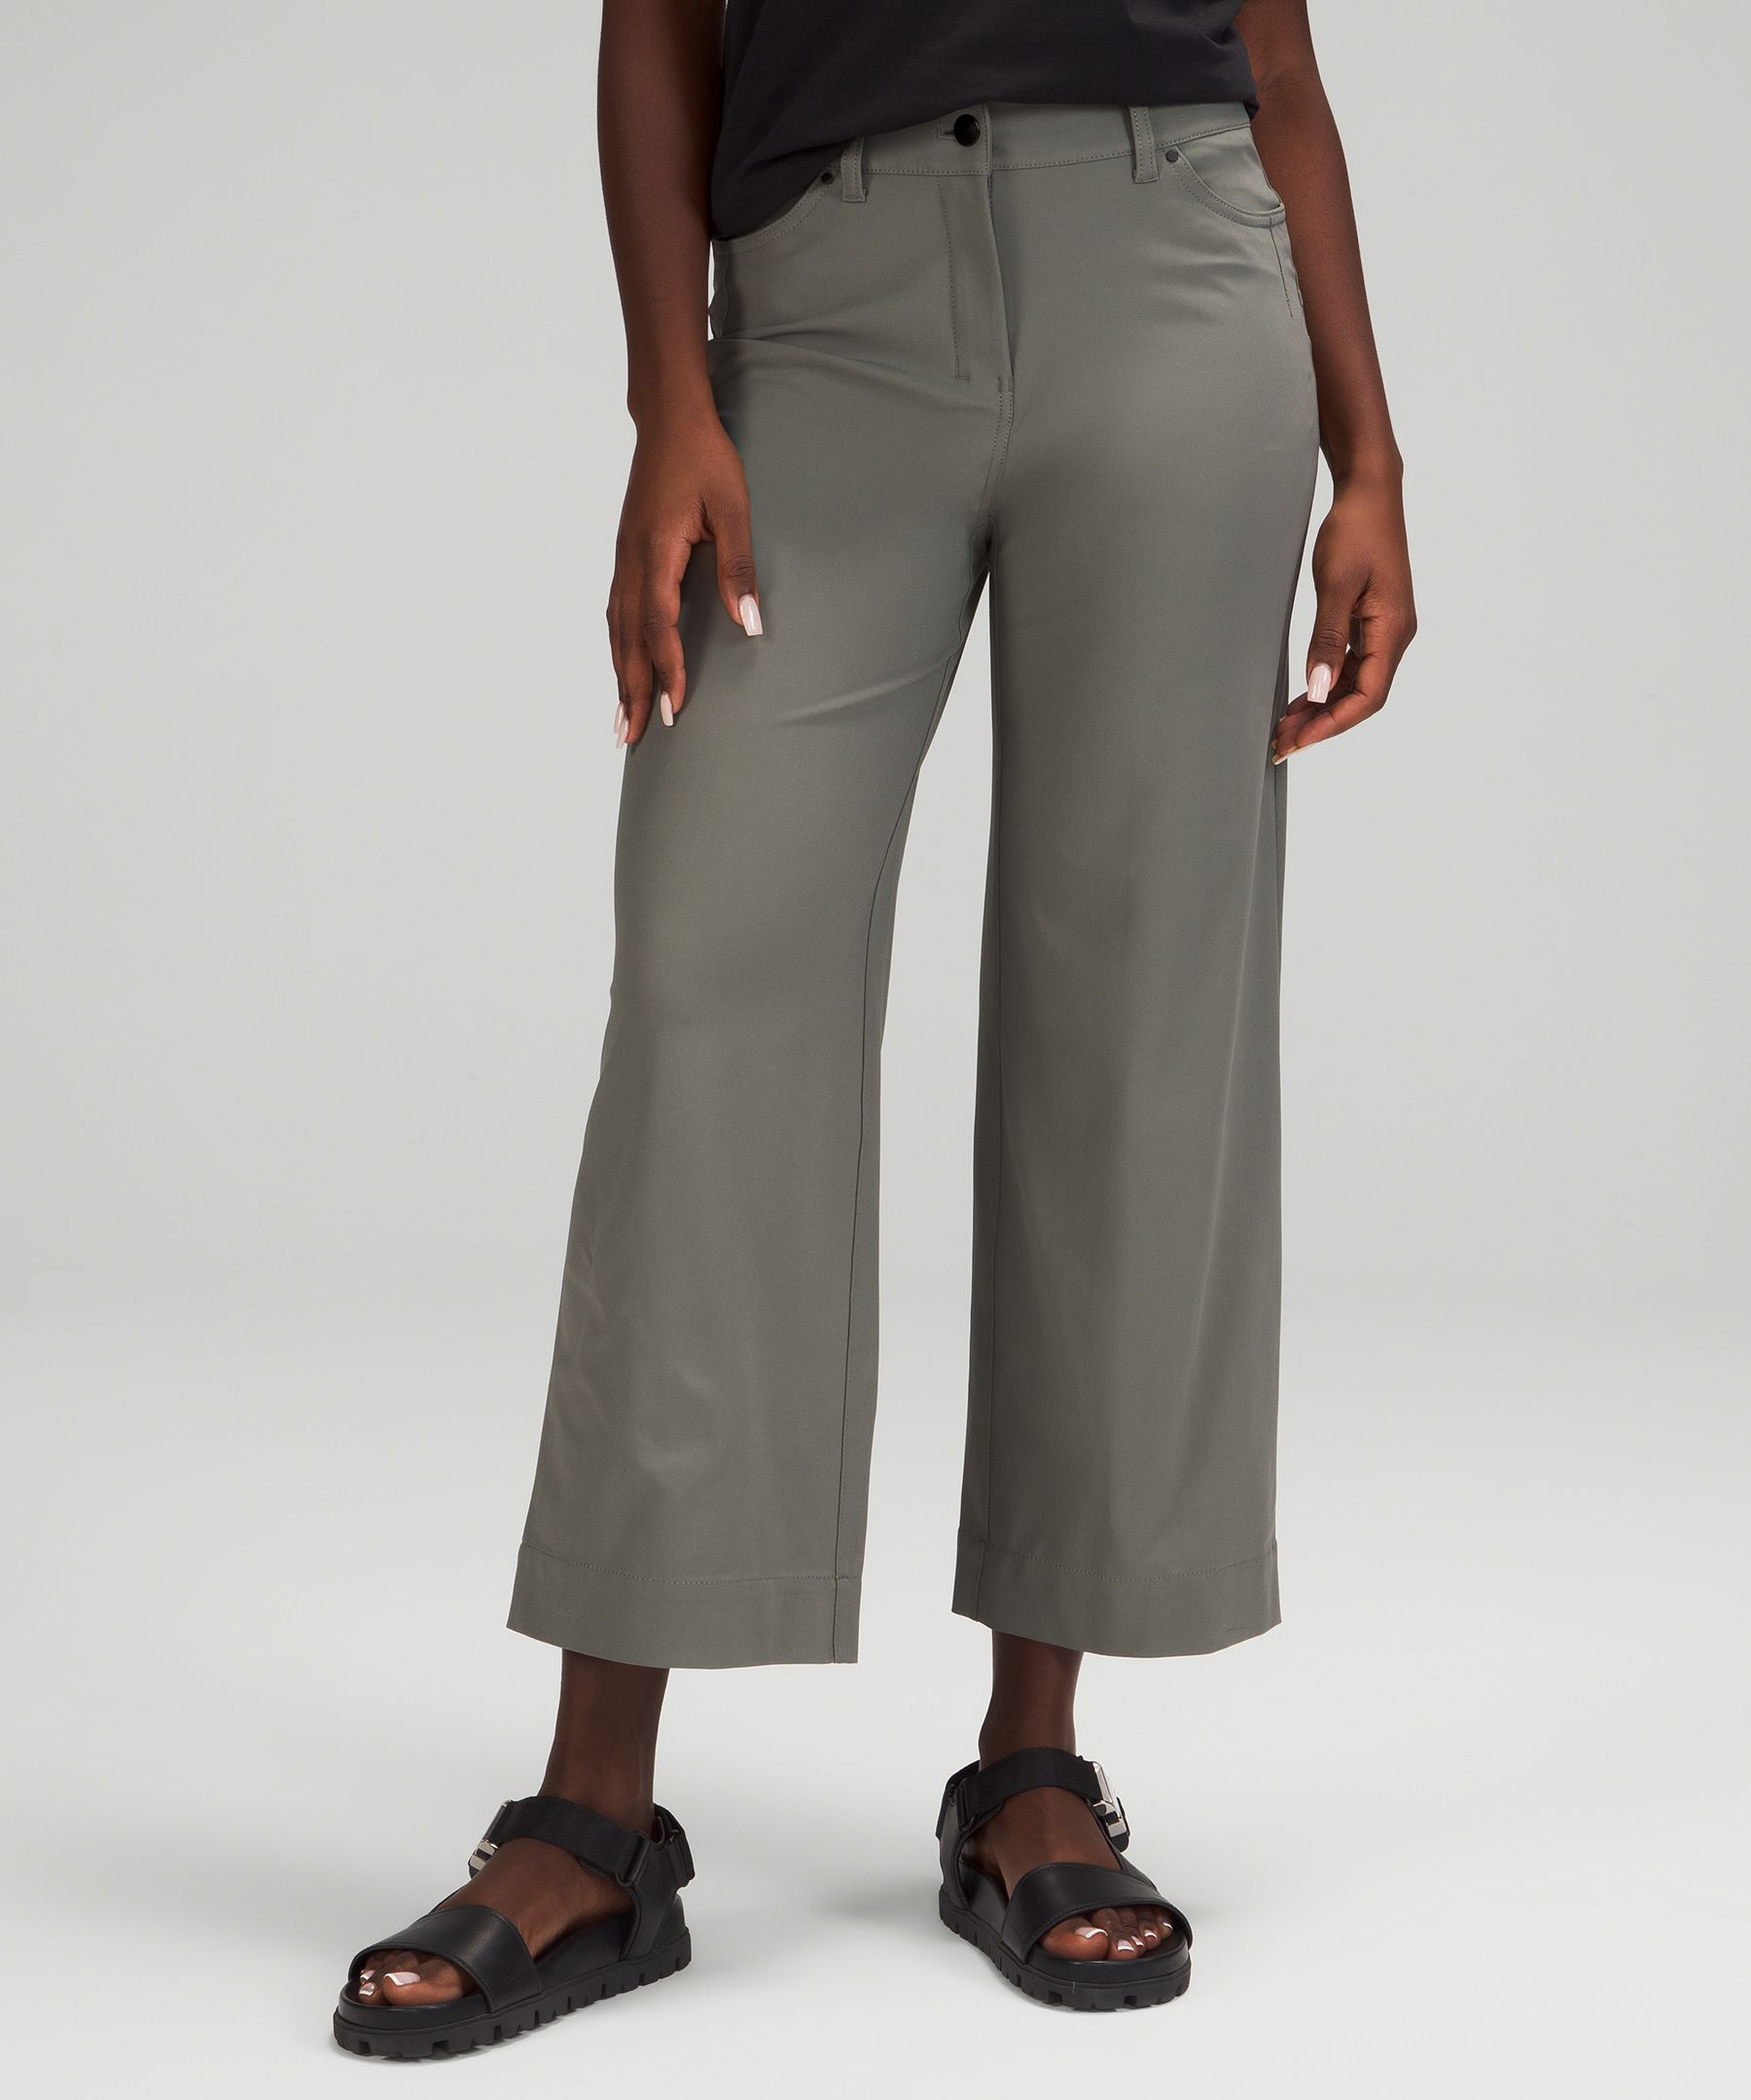 Lululemon Wide Leg Trousers Archives  International Society of Precision  Agriculture